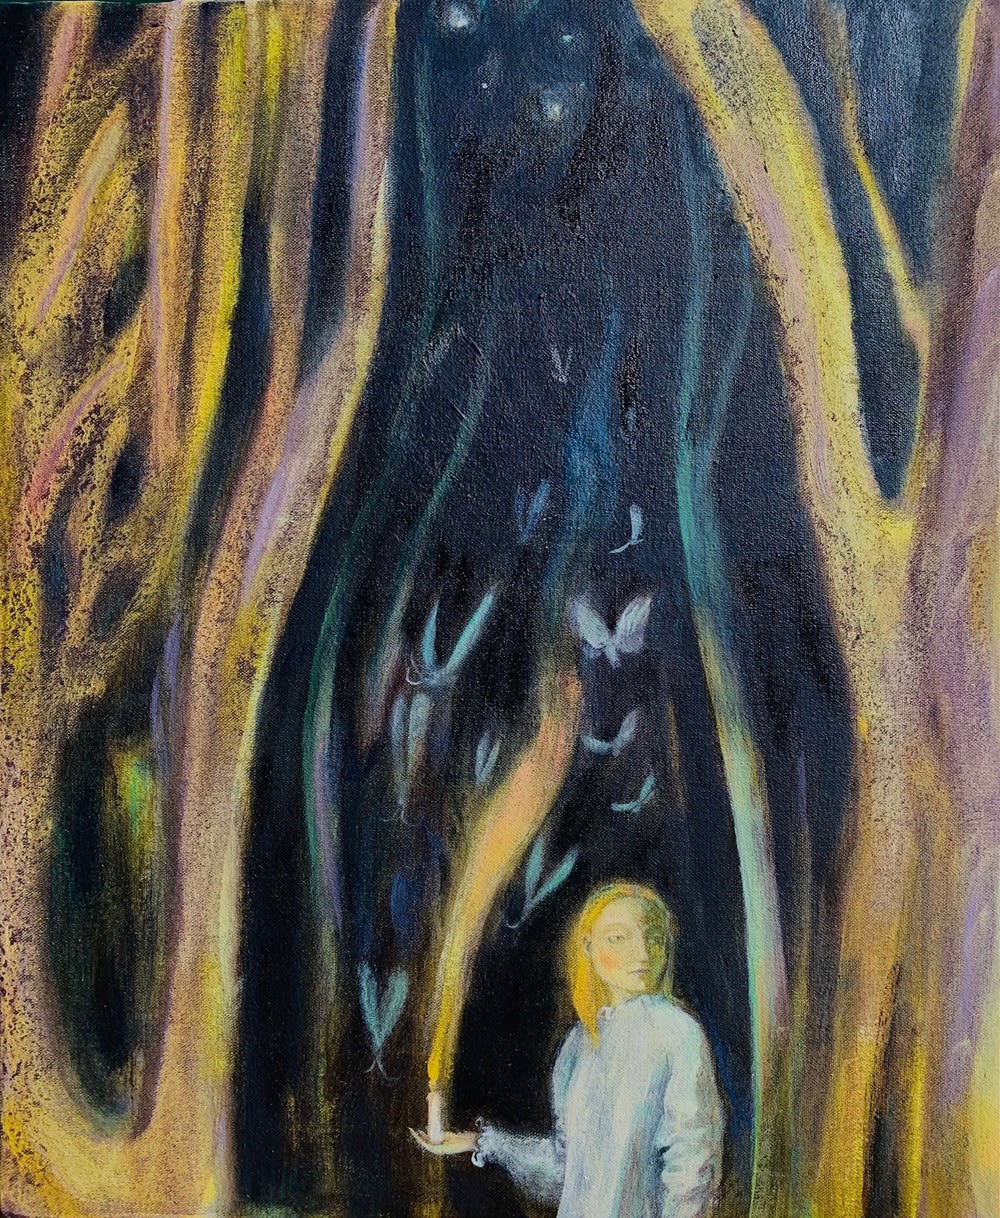 Flora McLachlan oil on linen painting of a woman stands among tall plants at night with a candle in her hand and moths gathering around her.